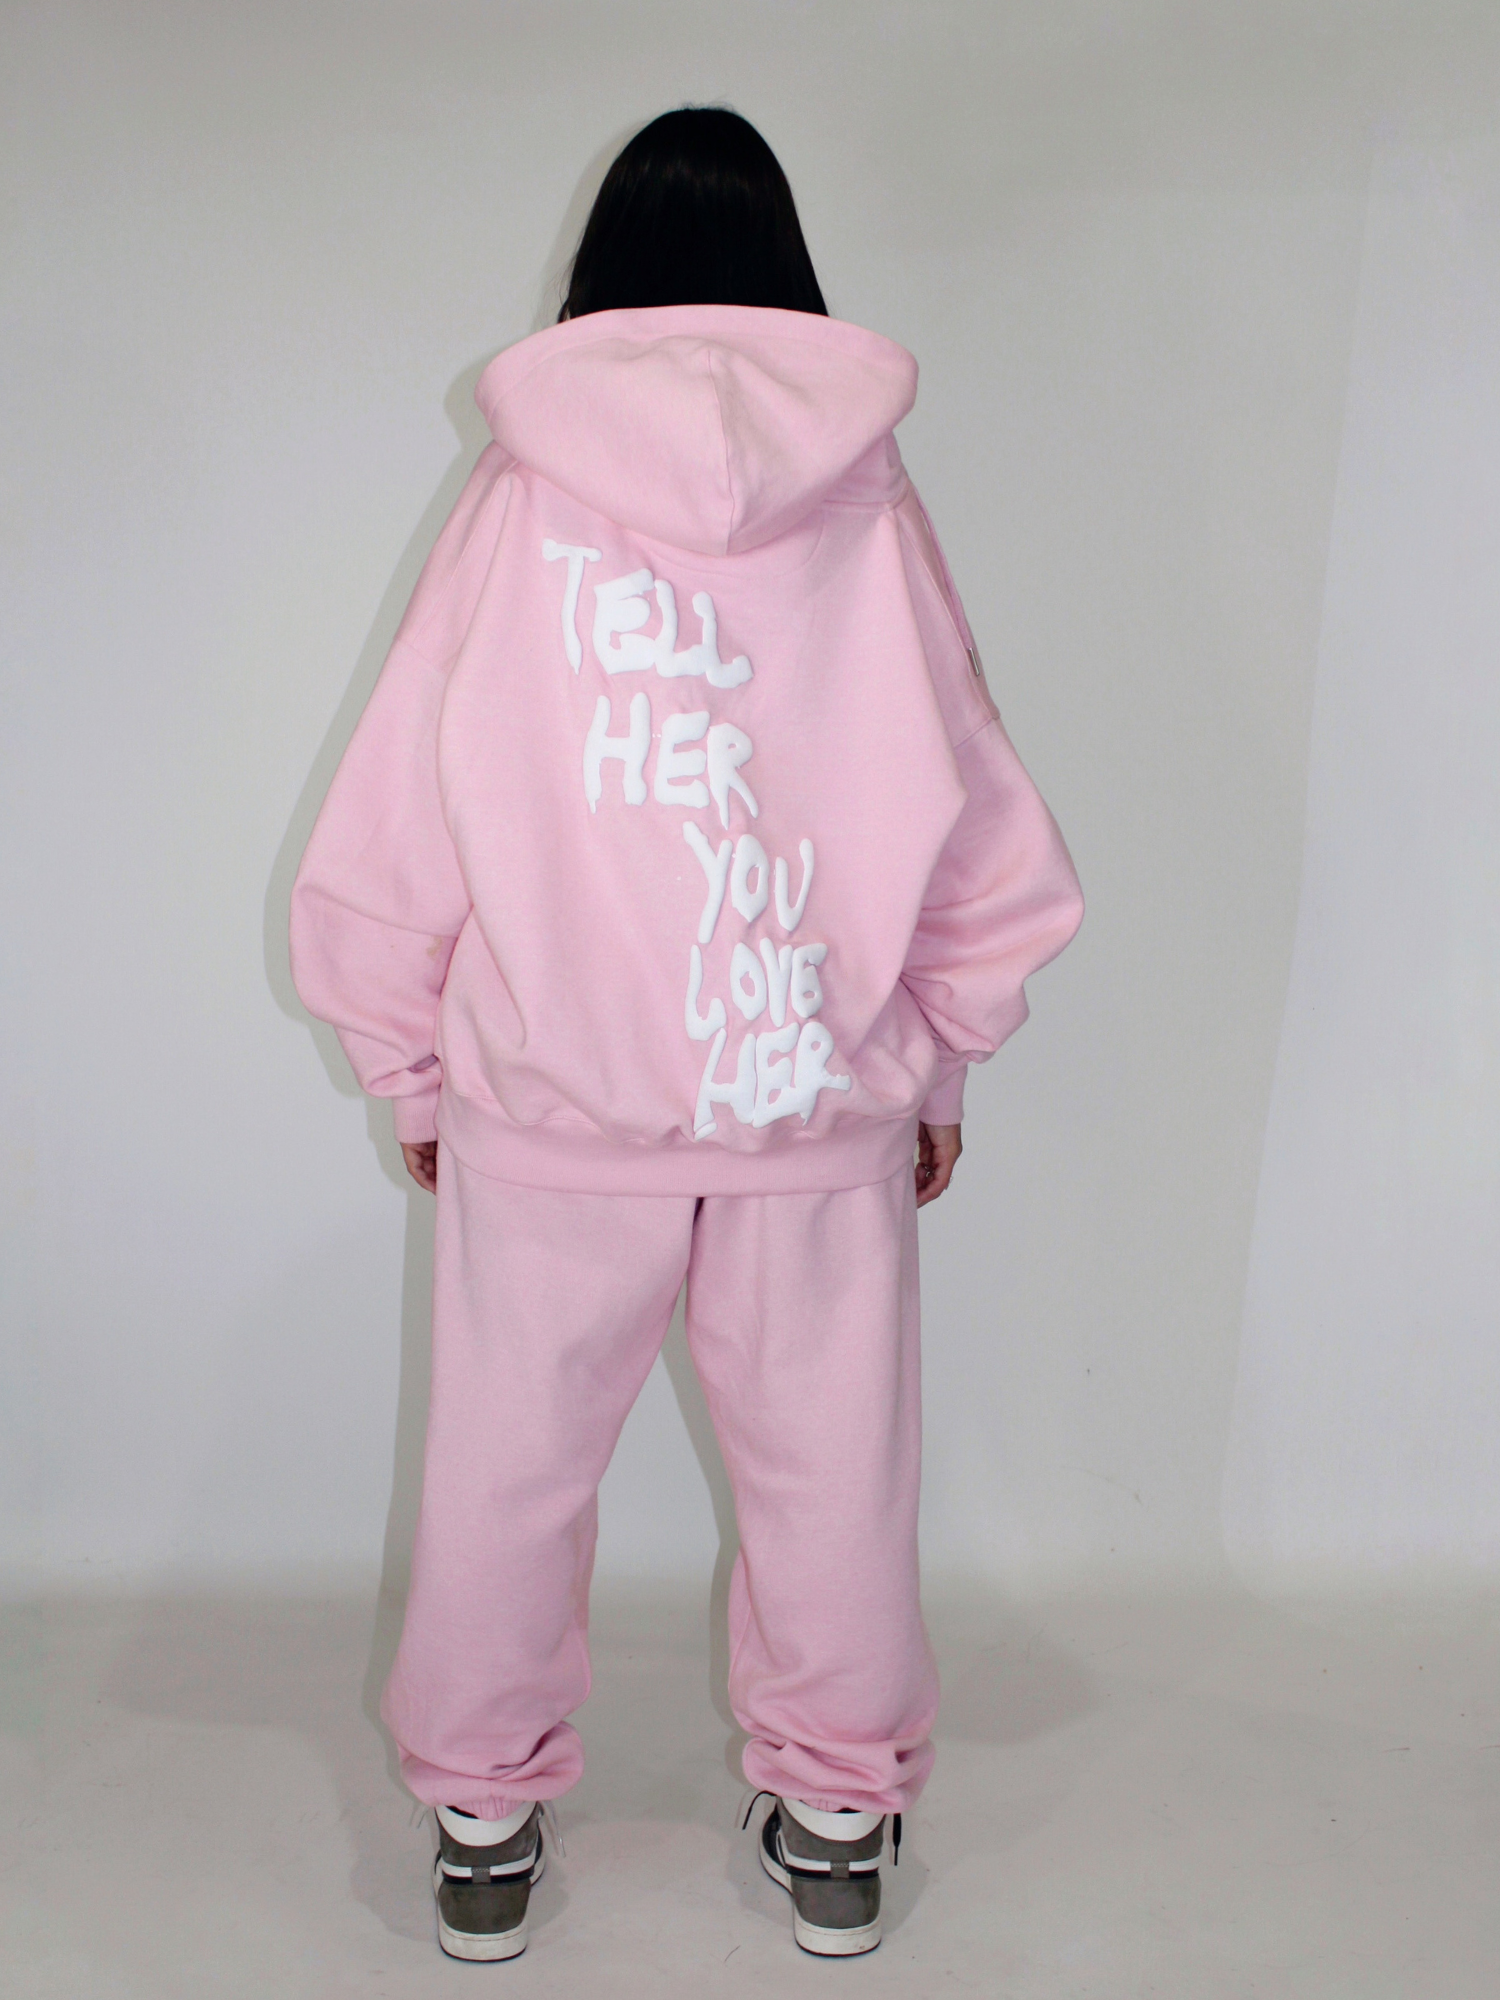 Tell Her You Love Her Zip Up in Pink